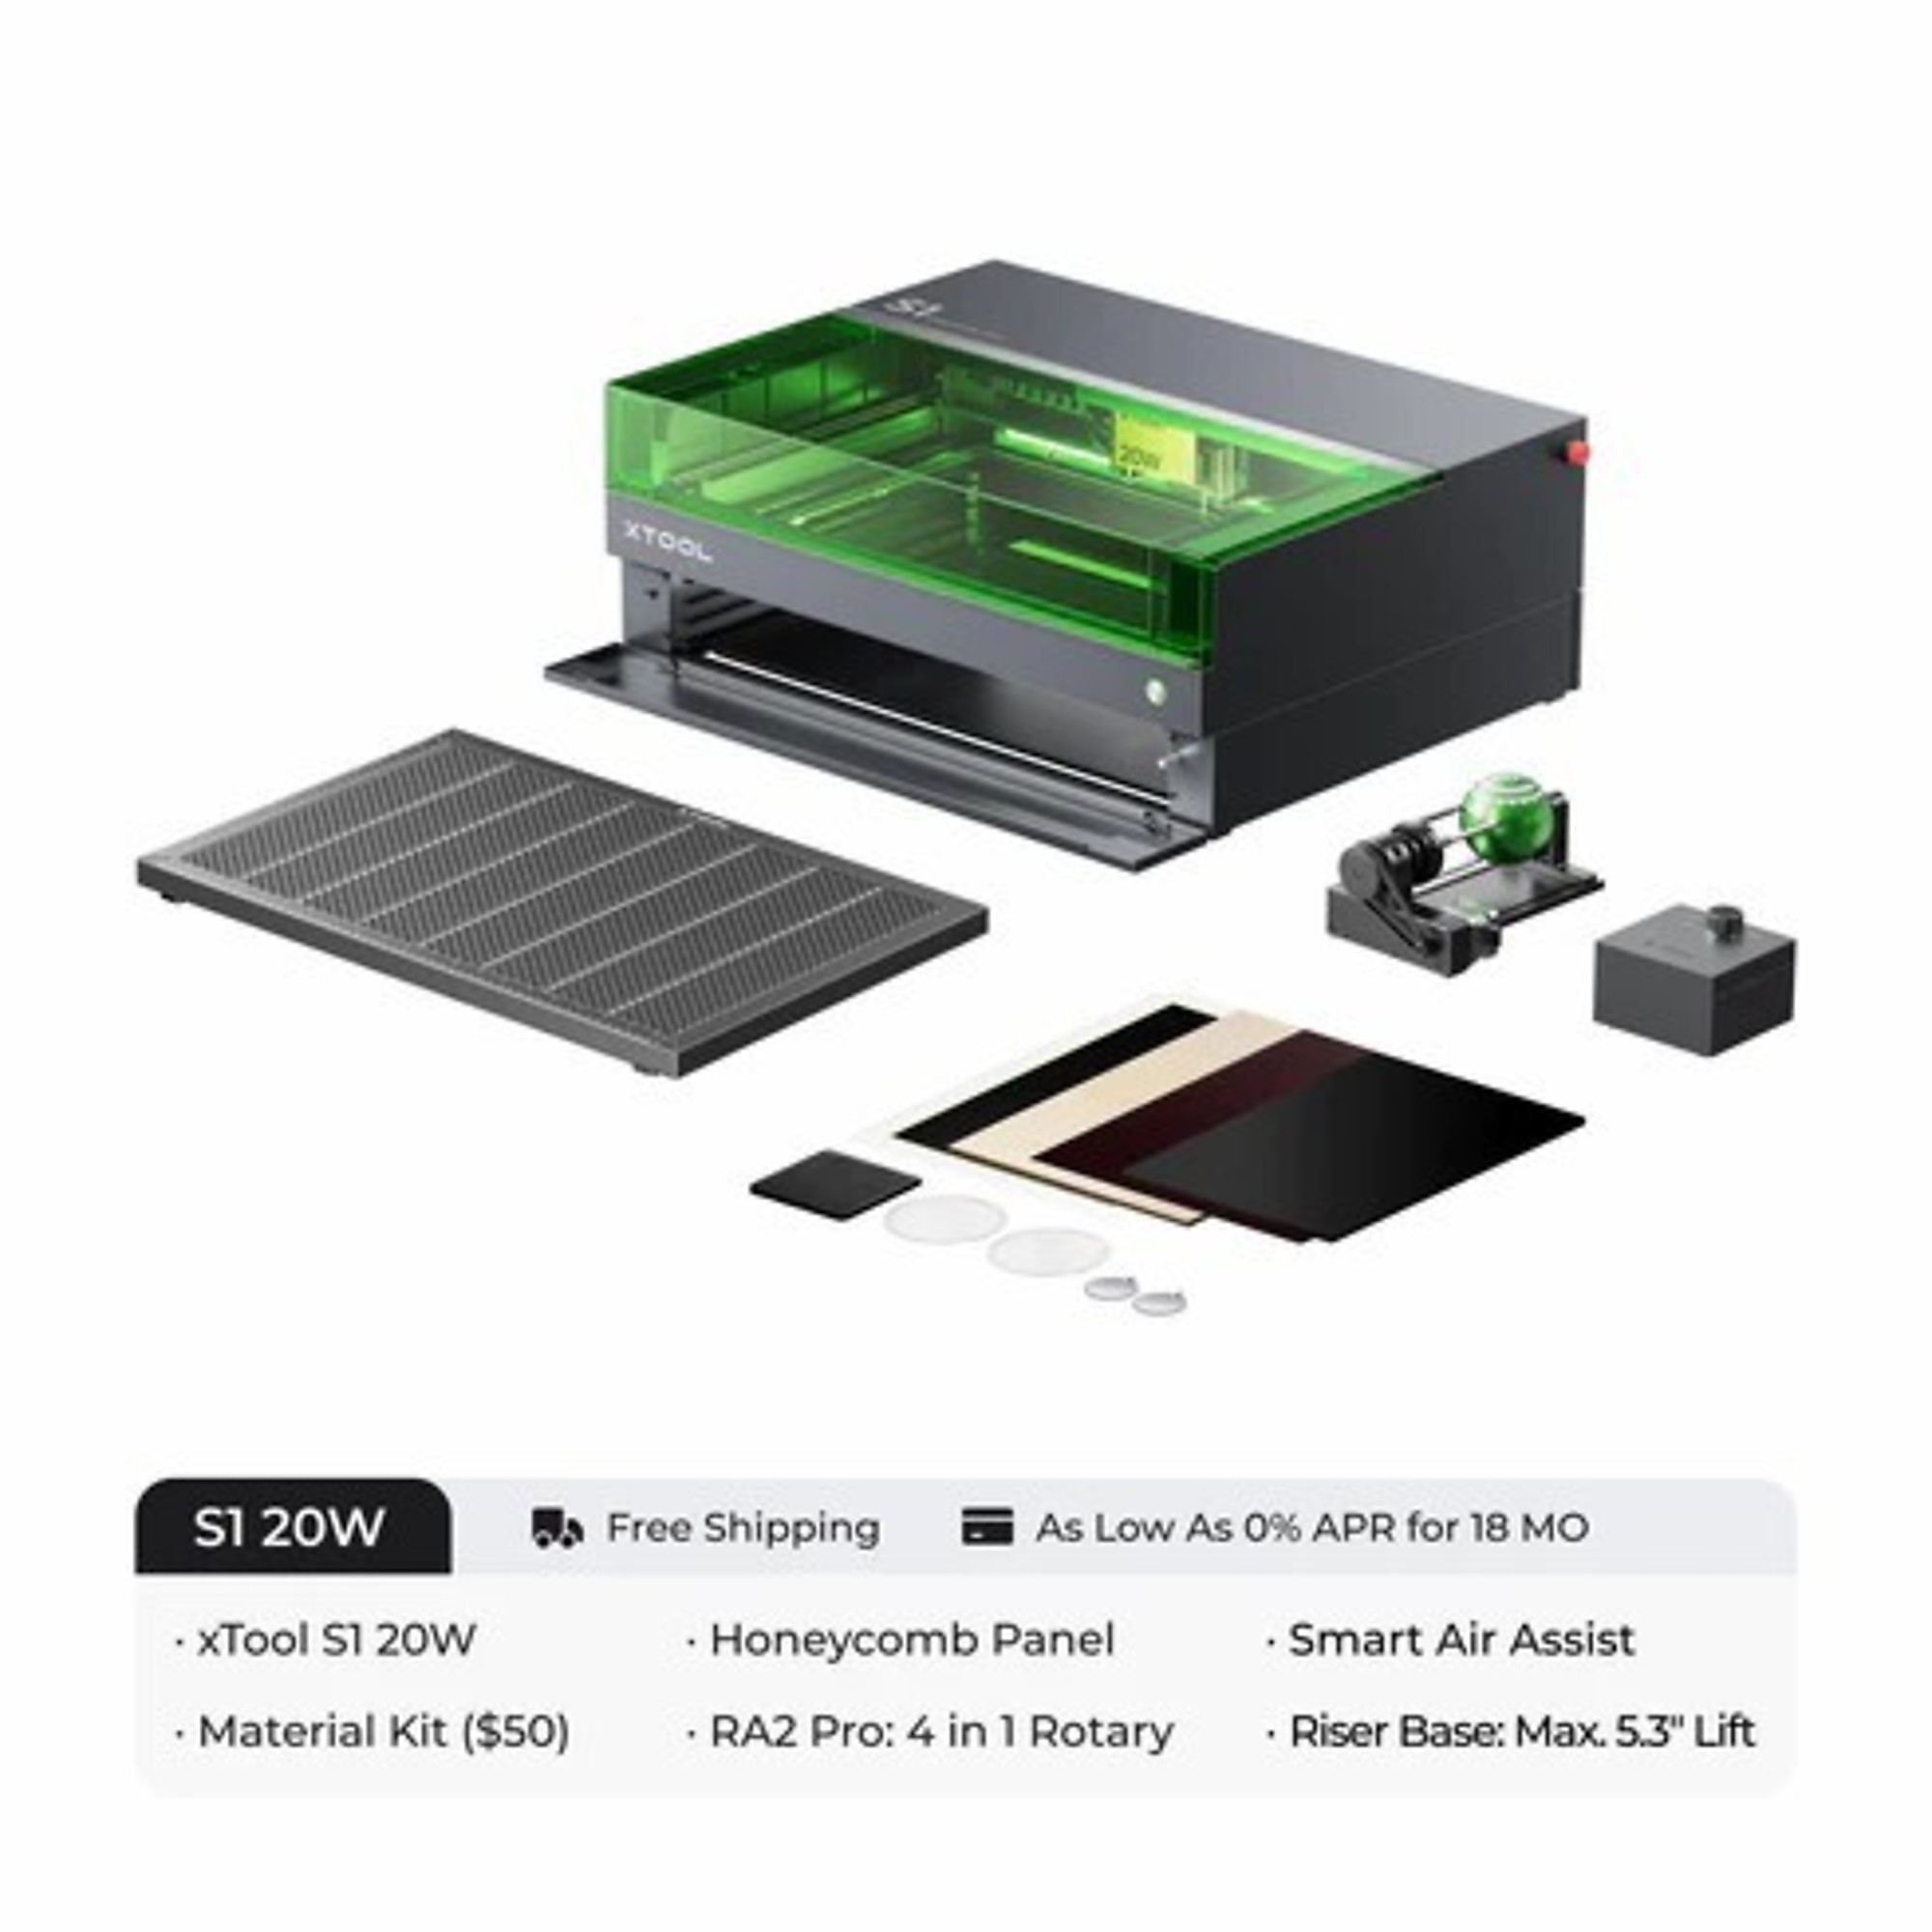 xTool, Laser Cutter and Engraver, 20w, 600mm/s, Working Width 25.98 in, Working Length 33.86 in, Laser Power 20 W, Model P1030503-P5010290-P5010279